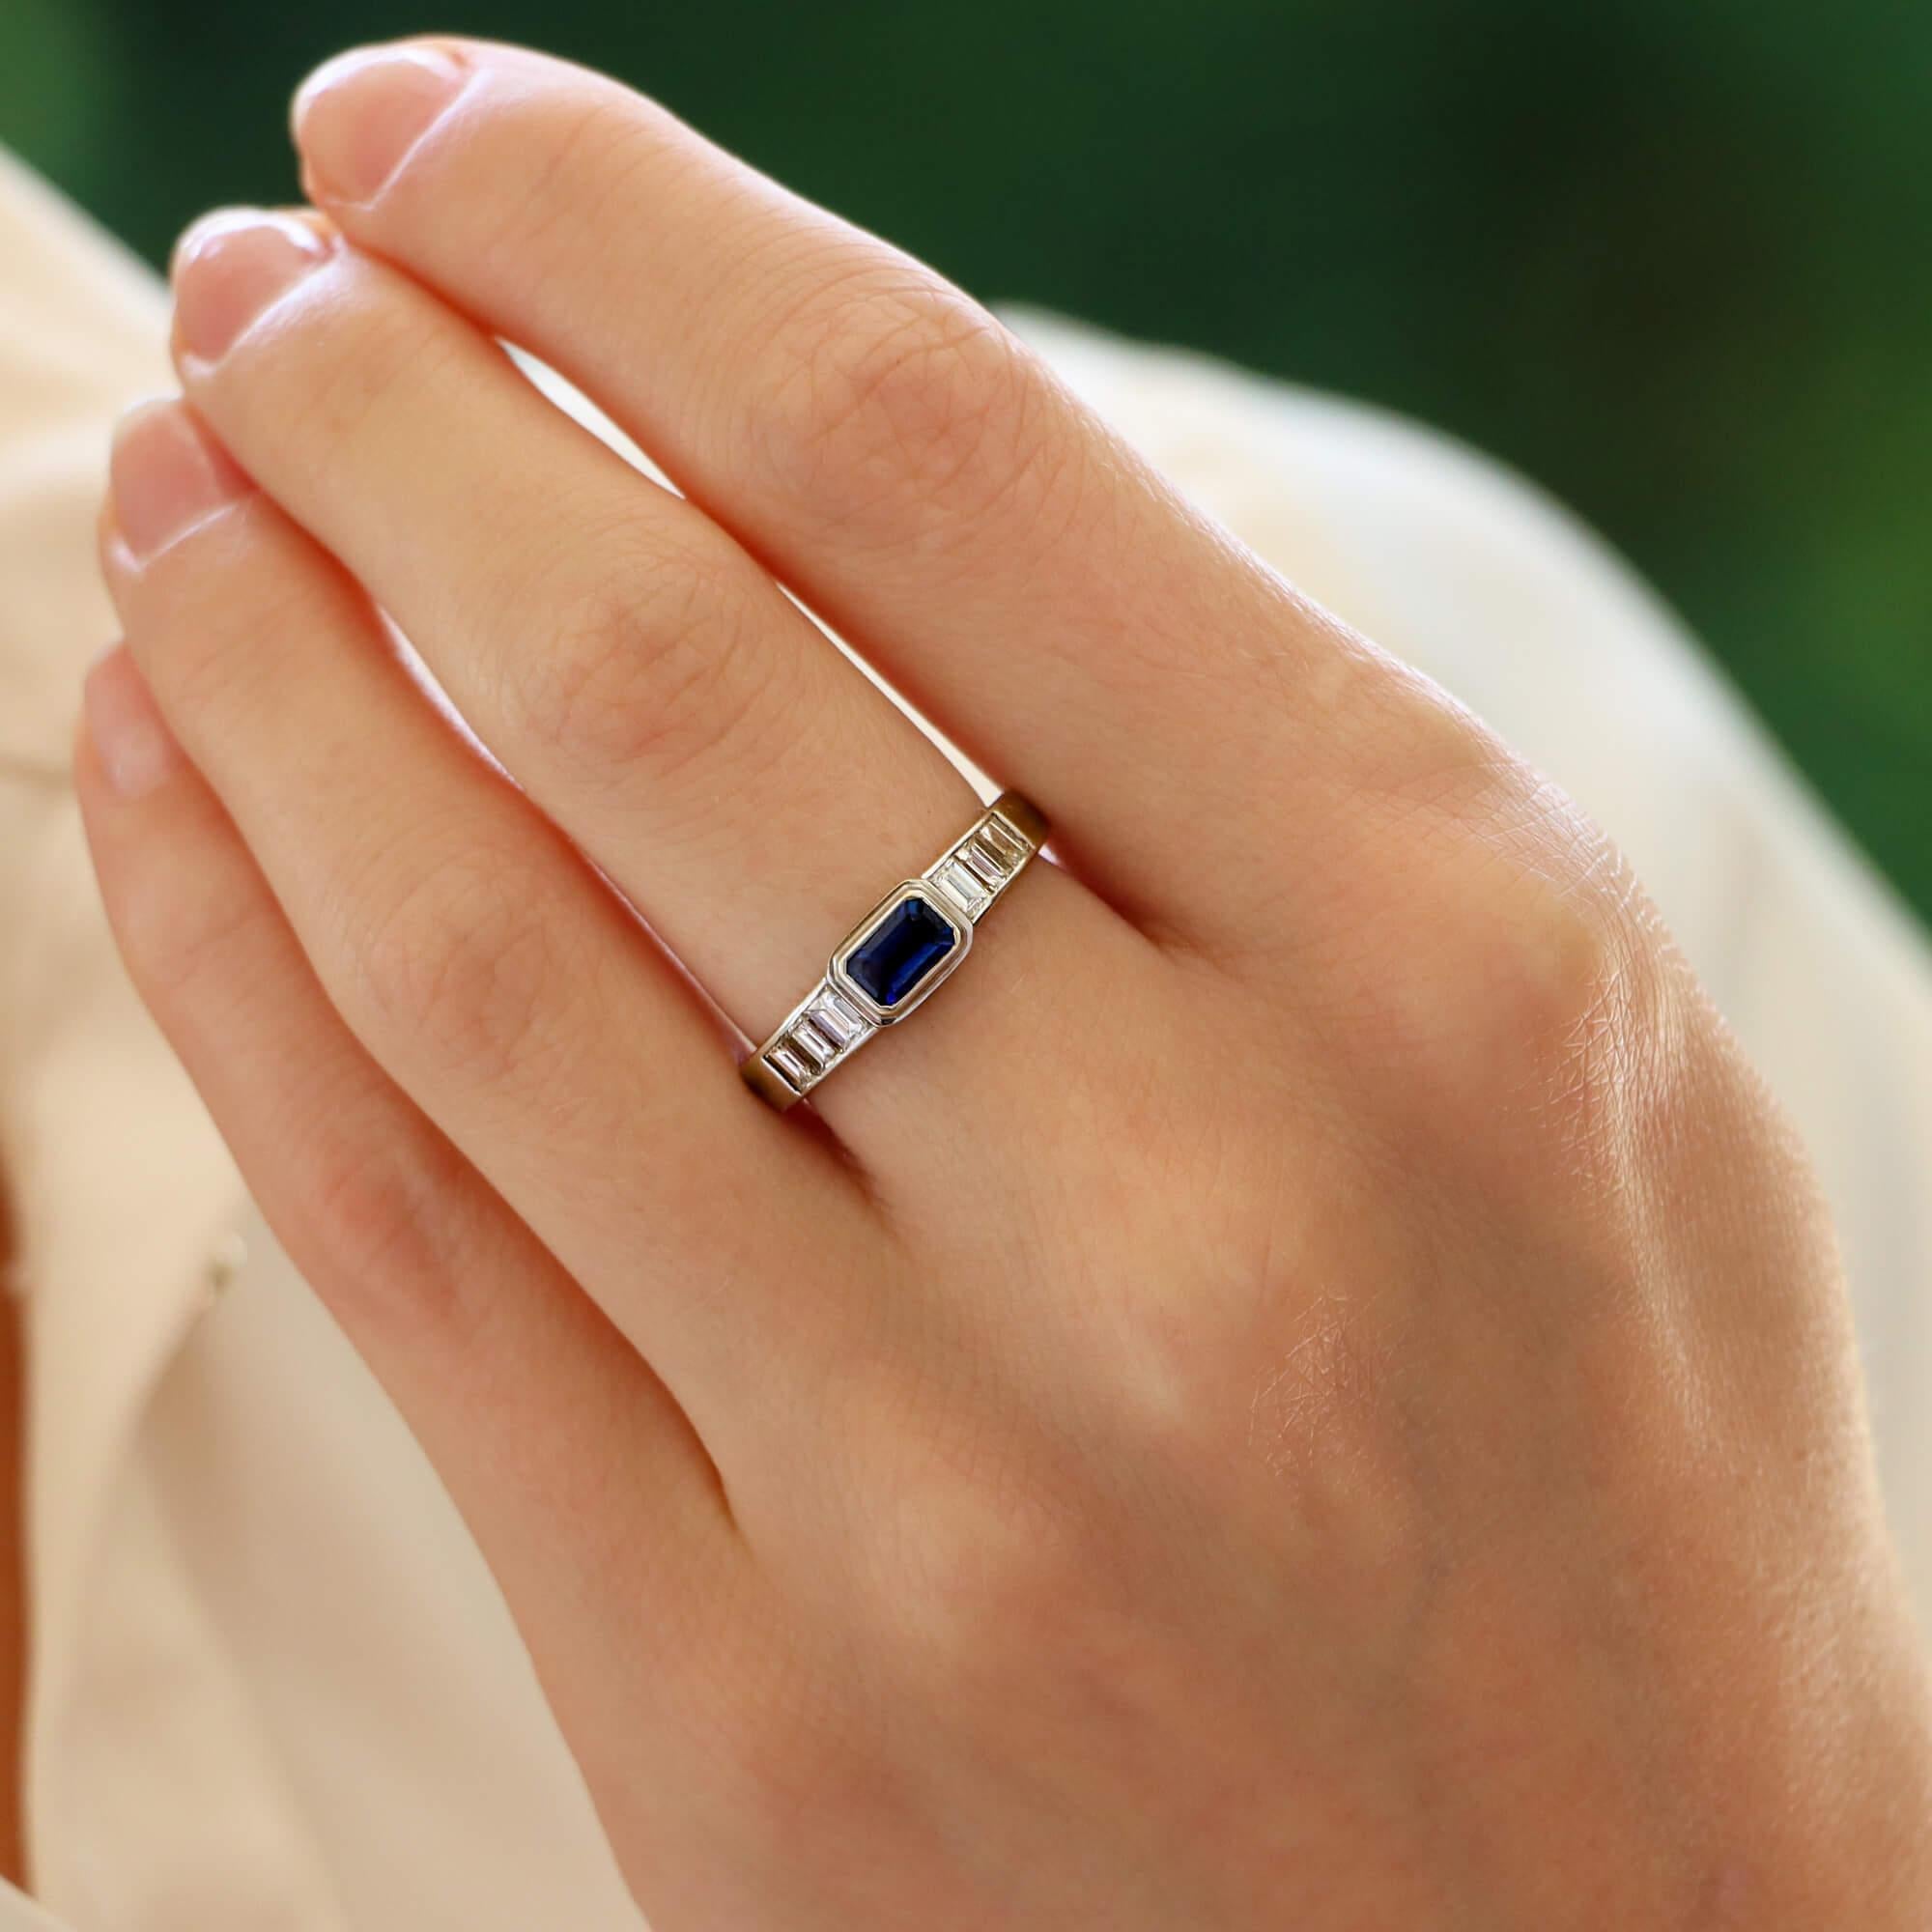 A highly unique Art Deco inspired sapphire and diamond ring set in 18k white gold.

The ring is centrally set with a 0.70 carat emerald cut blue sapphire which is securely rub over set in a platinum. To each shoulder are three graduating emerald cut